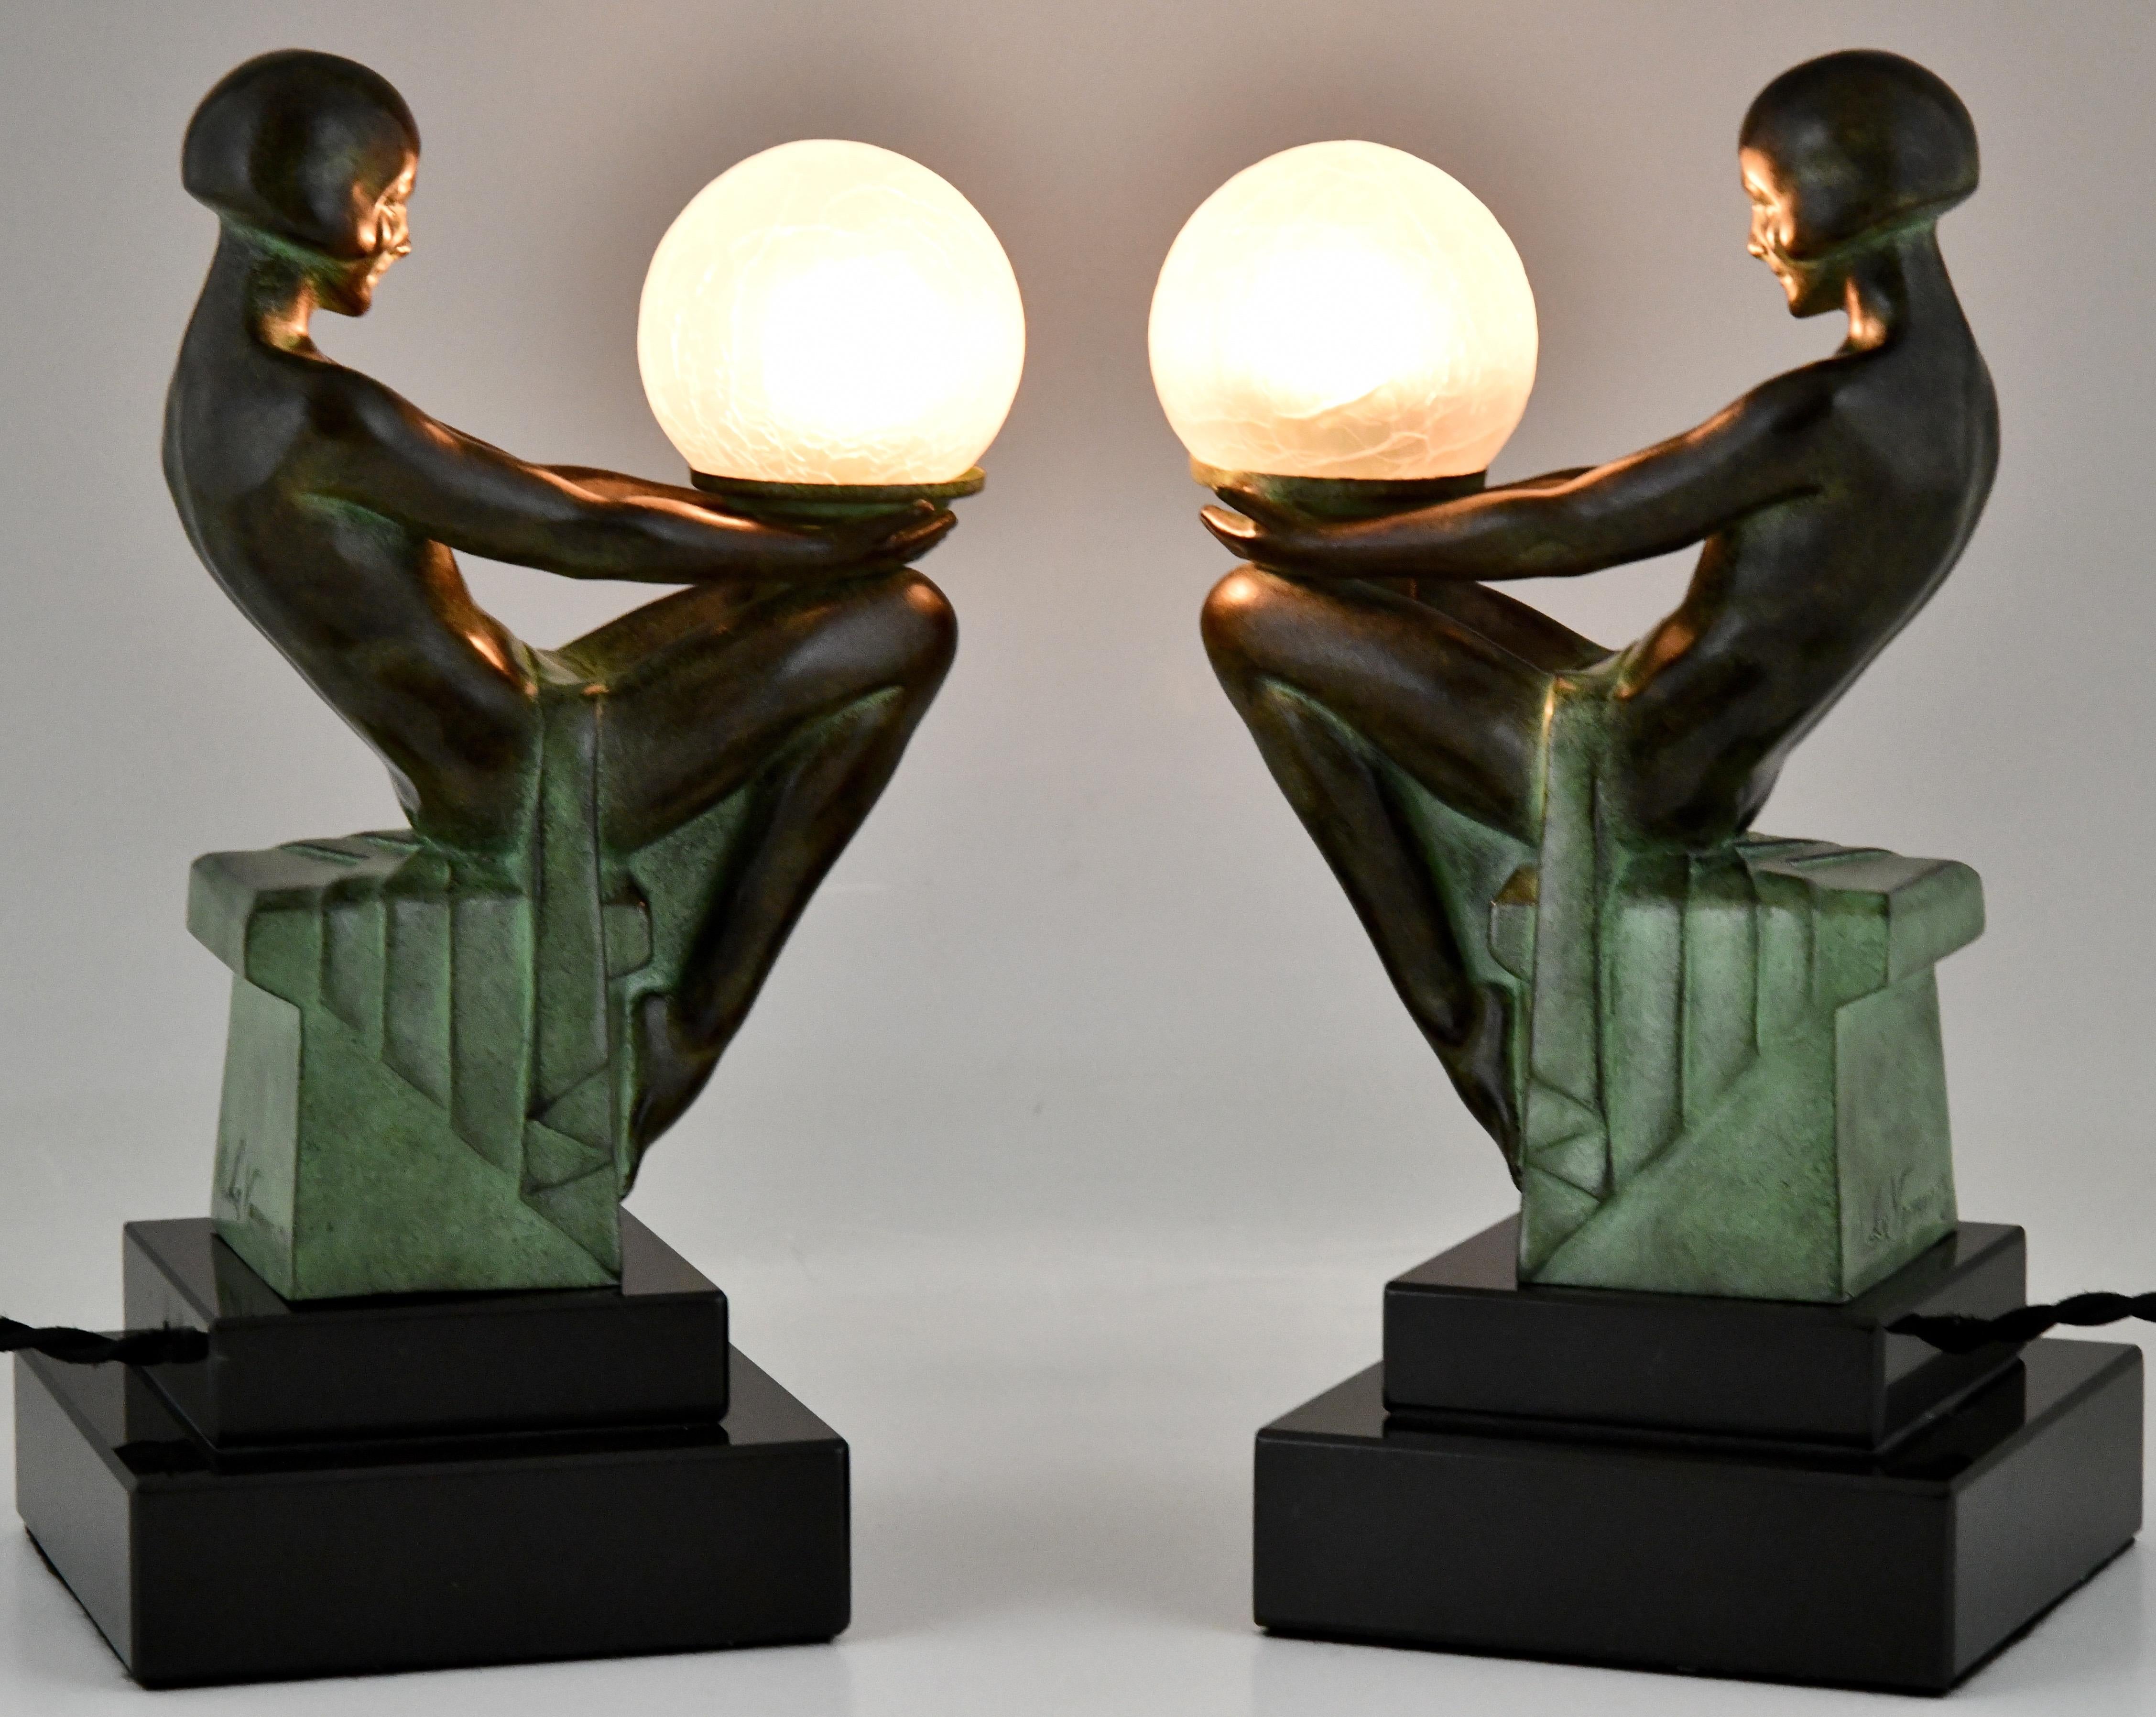 Pair of Art Deco style figural table lamps.
Seated nudes holding a glass ball. 
By Max Le Verrier.
Design 1930. 
Posthumous cast at the Max Le Verrier foundry.
 